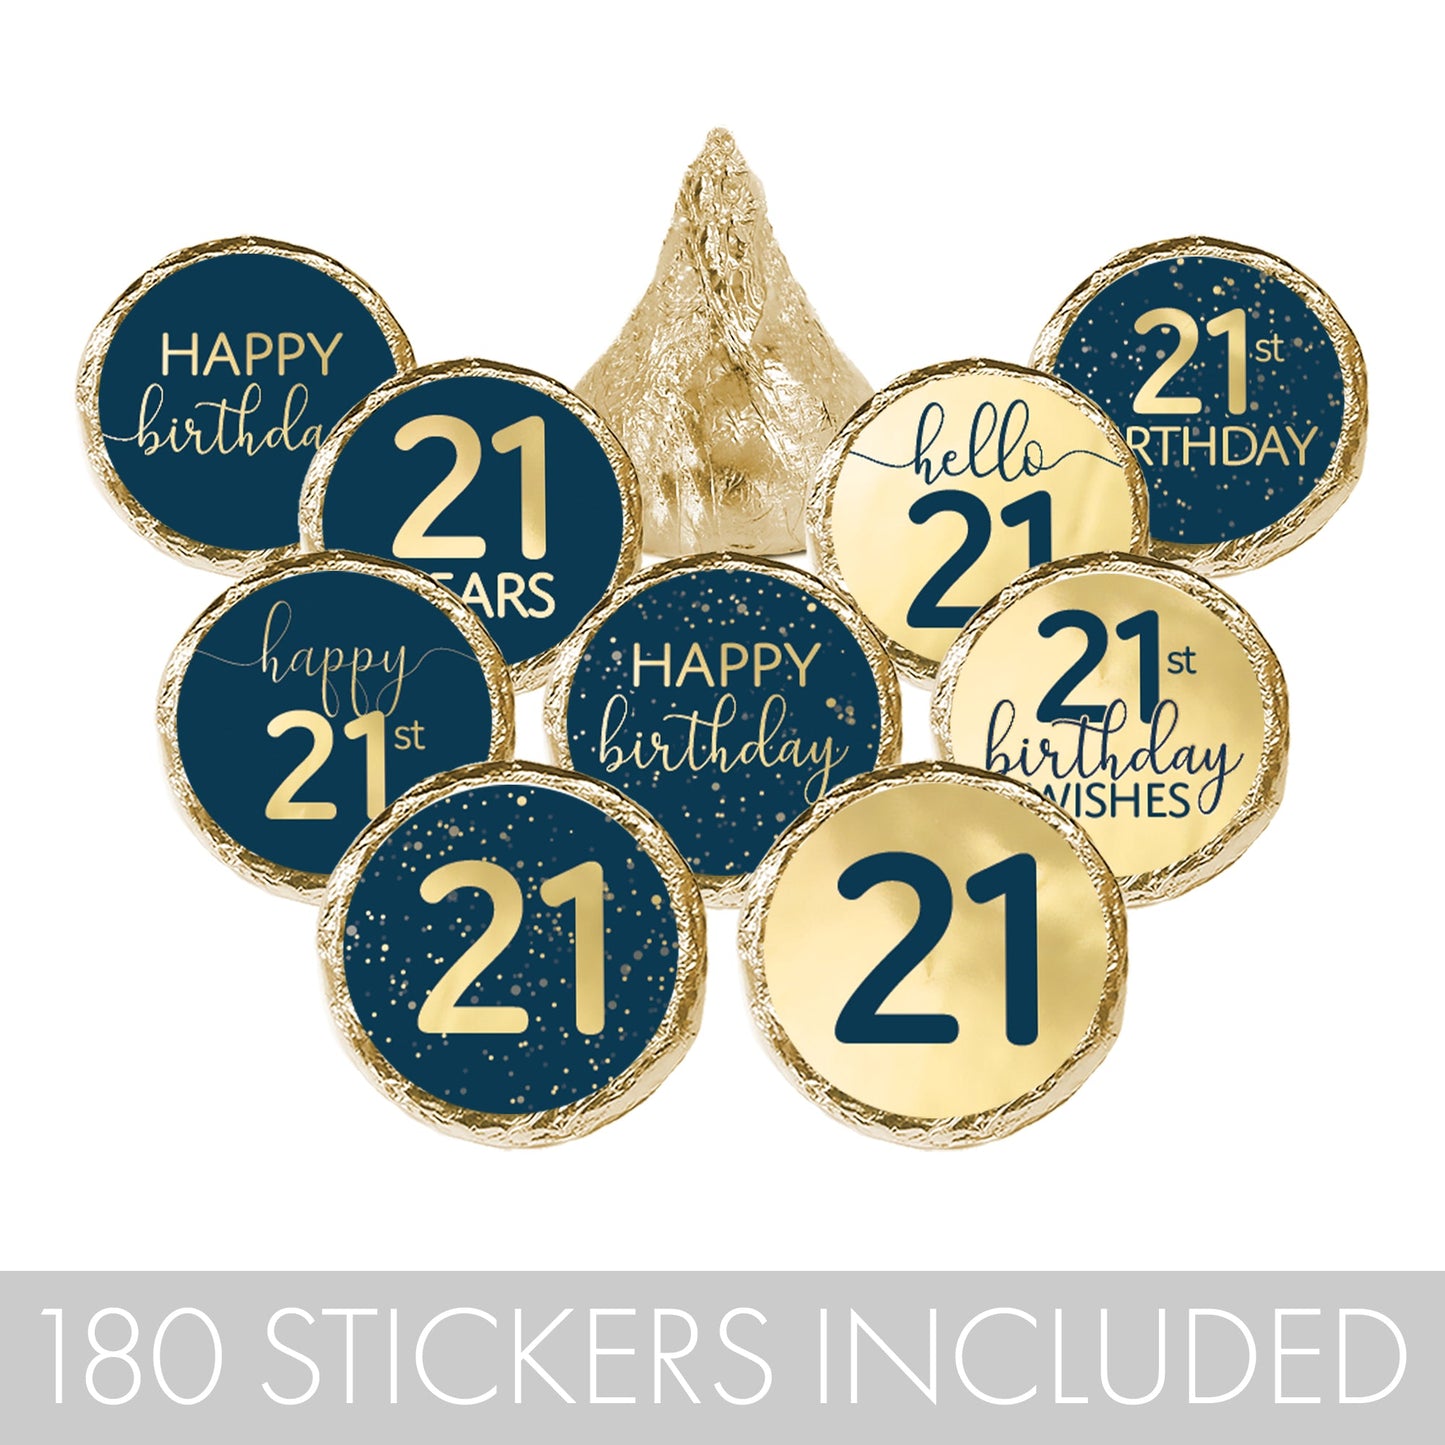 happy 21st Hersheys Kisses stickers with a navy blue and gold foil design